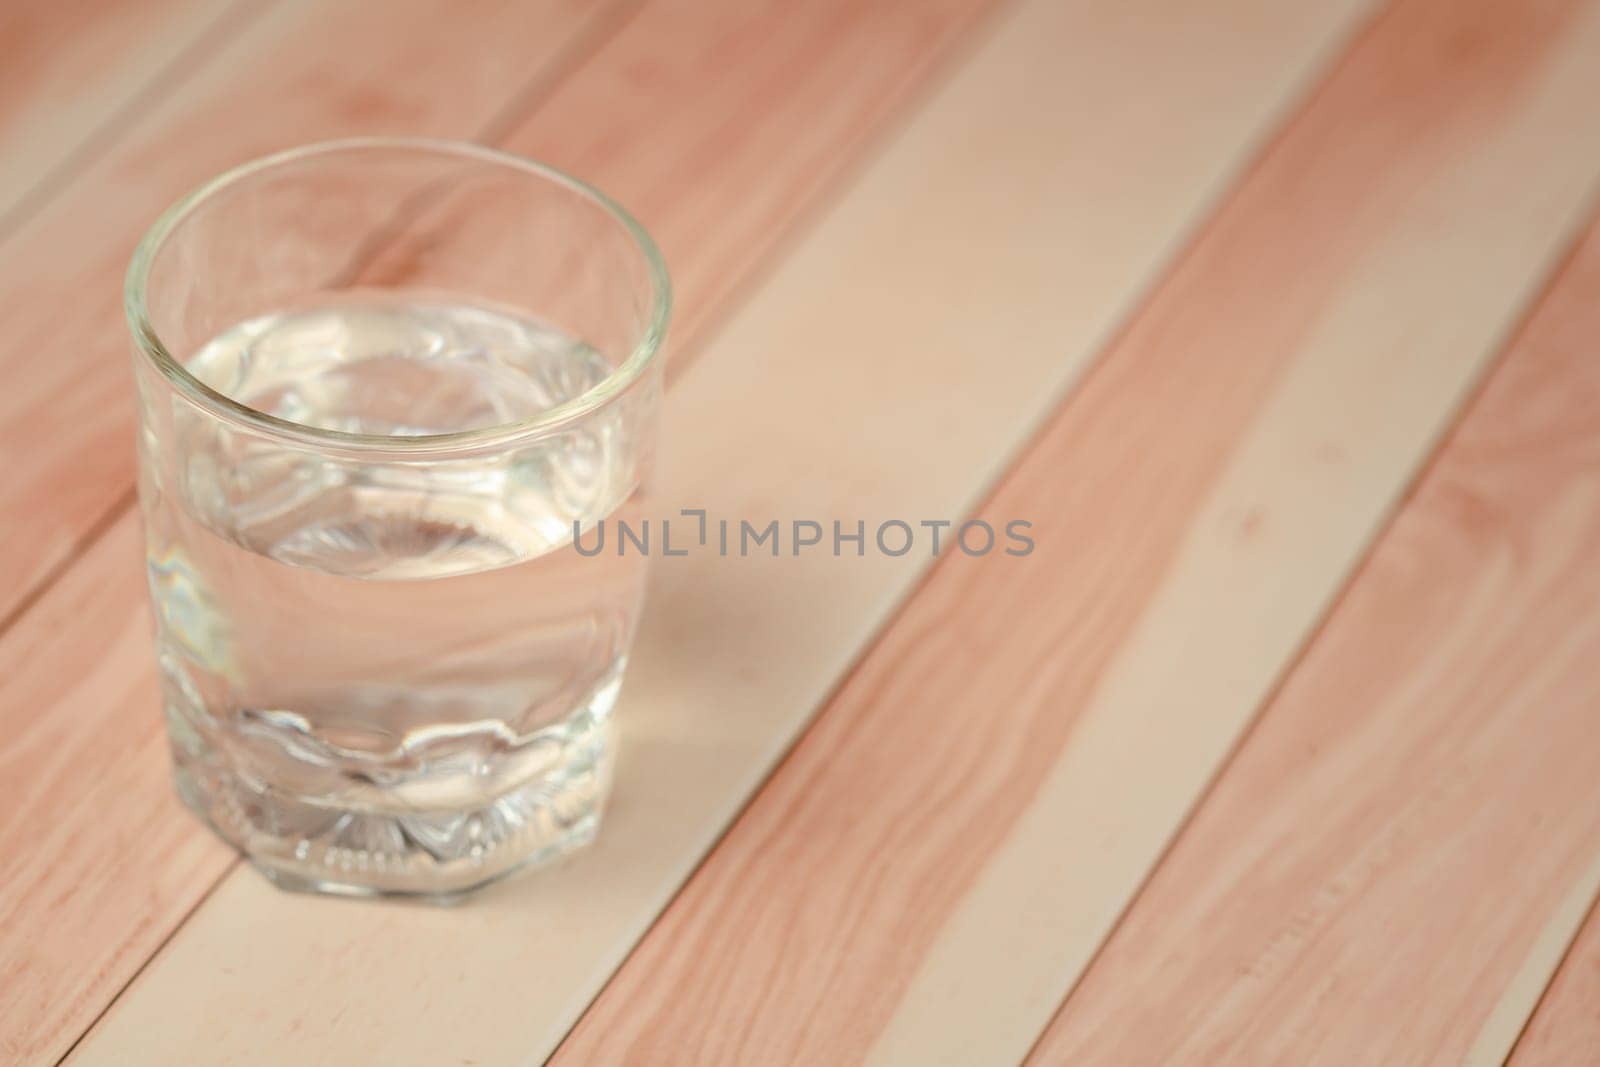 A clear glass filled with water on a wooden table for a refreshing and health-conscious beverage. Soft focus image.